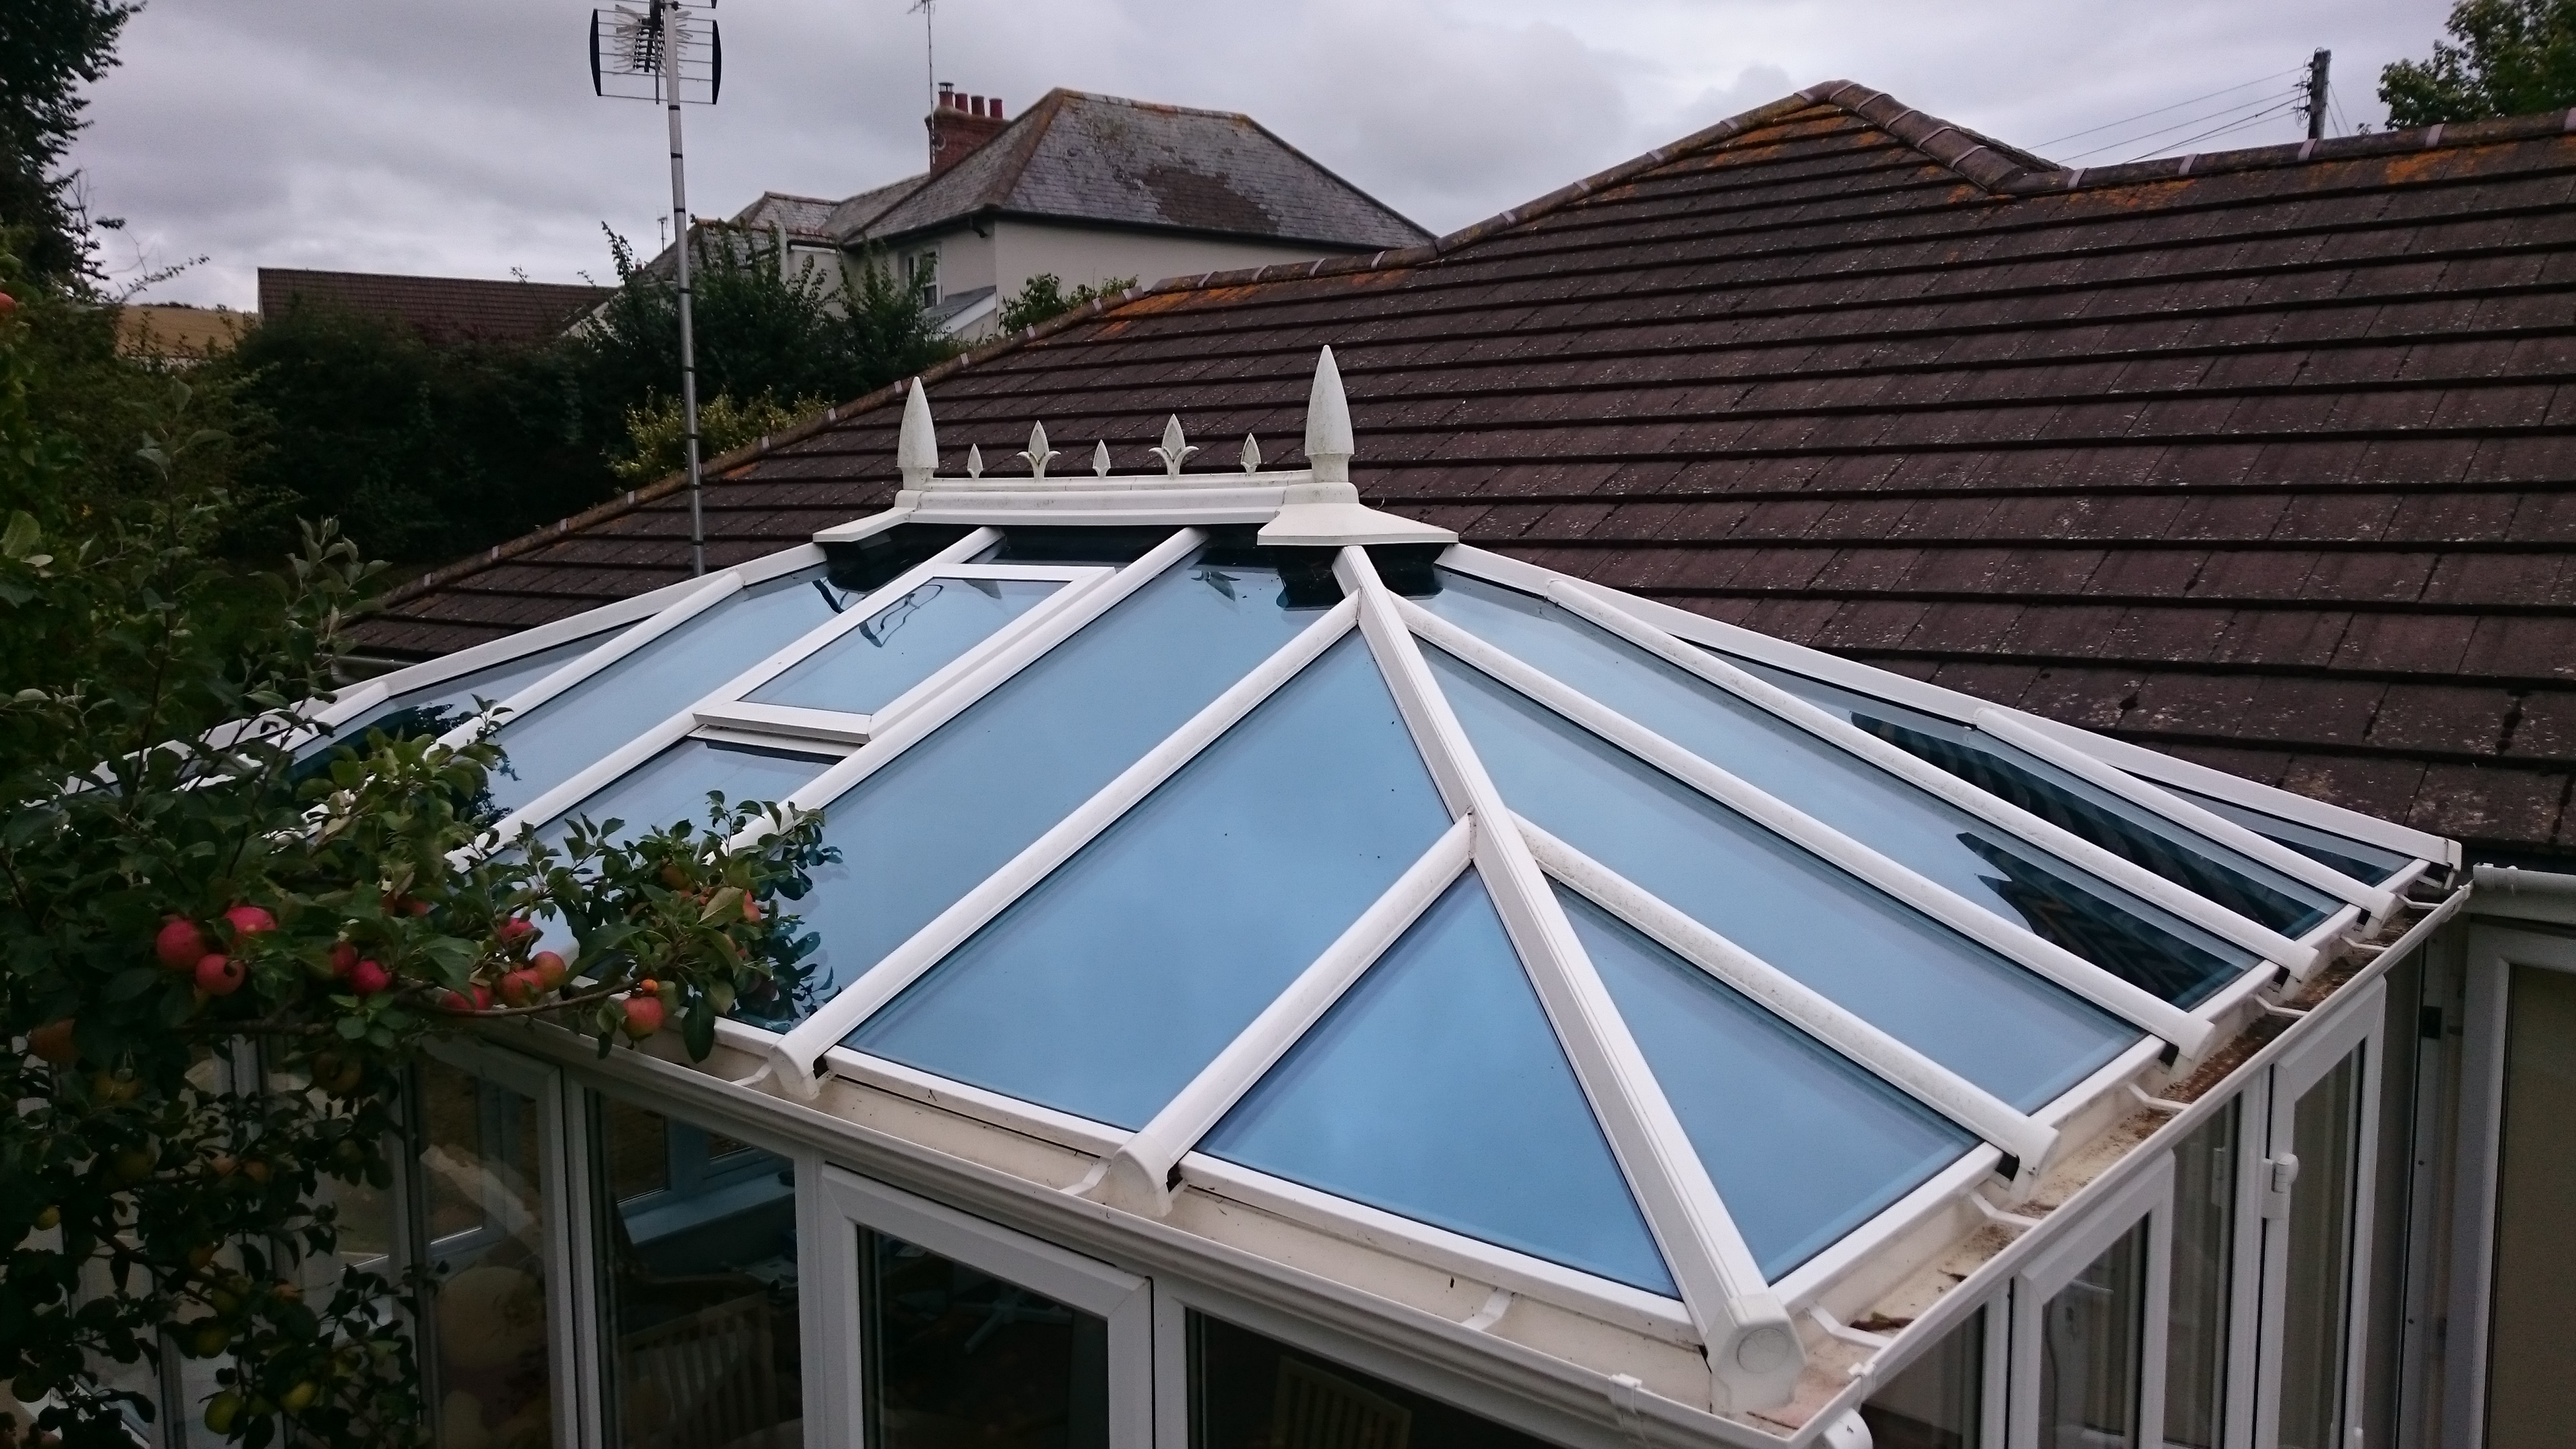 Amazing mirrored blue finished roof glass to reduce heat, glare, and UV fading issues in this conservatory. Fitted by Tinting Express Barnstaple Devon